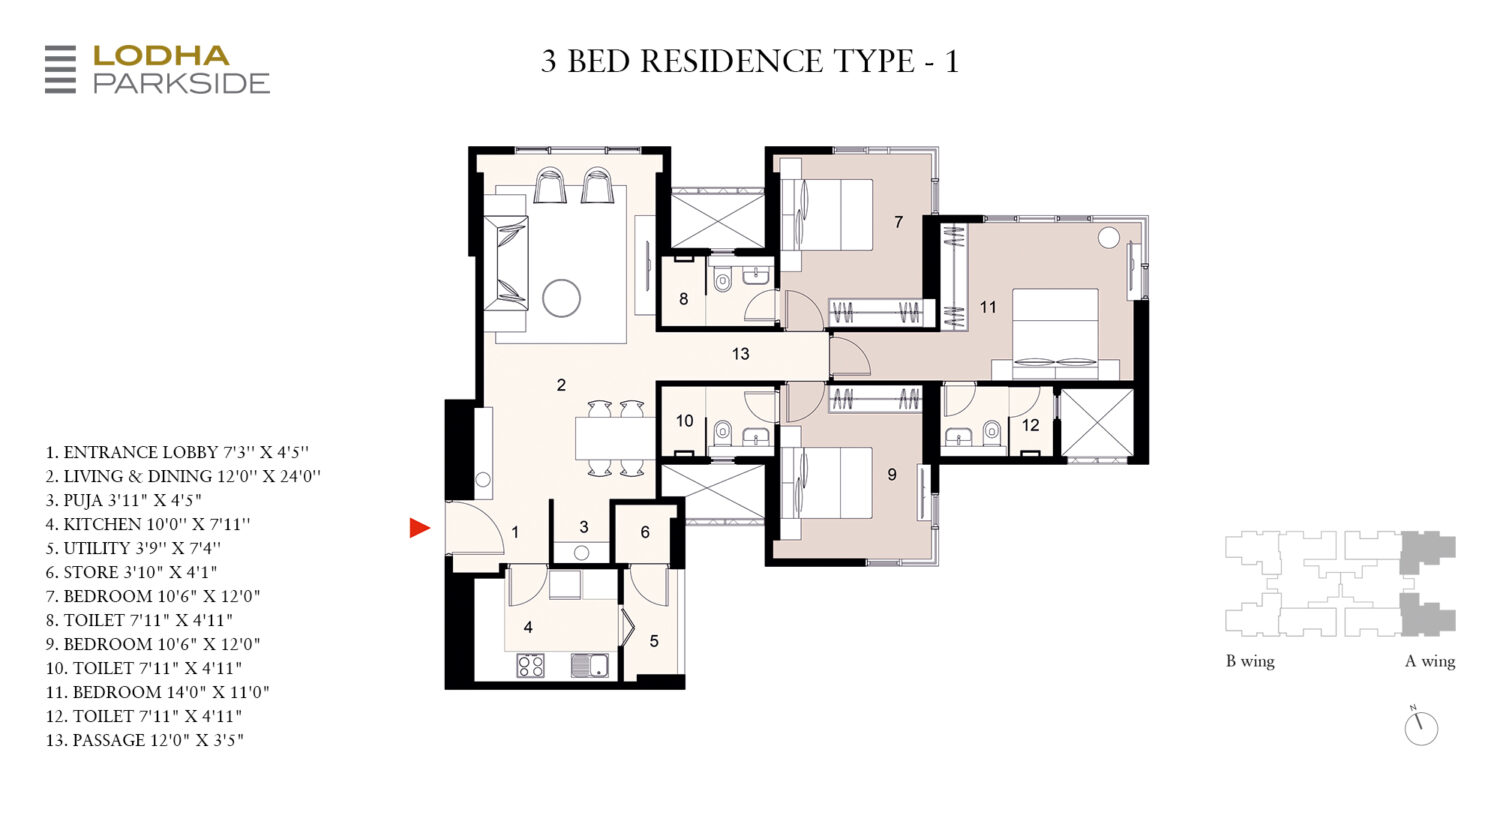 3 BED RESIDENCE TYPE 1